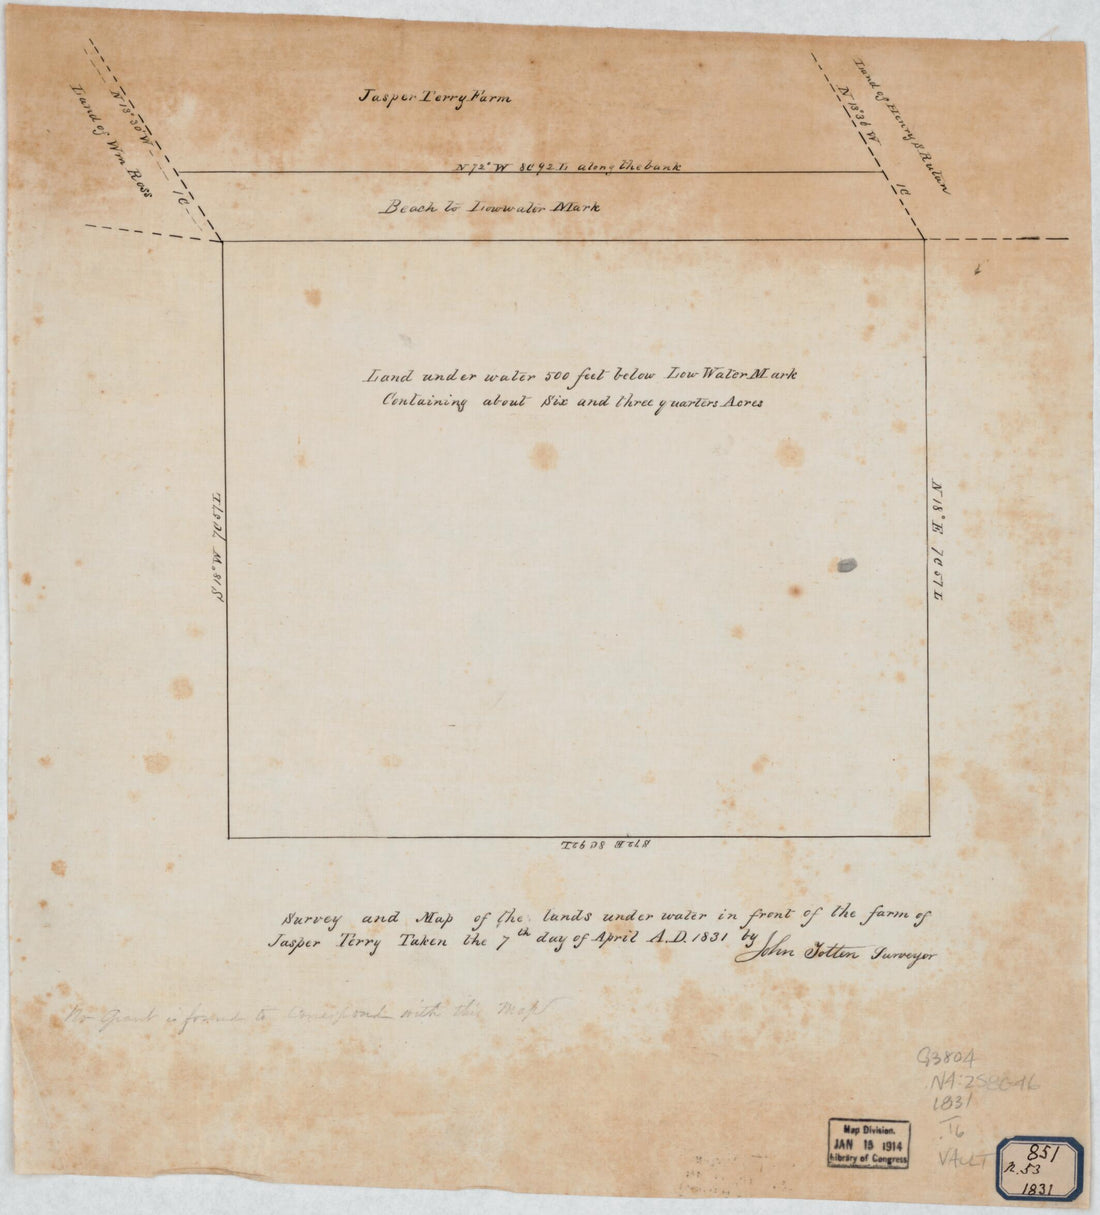 This old map of Survey and Map of the Lands Under Water In Front of the Farm of Jasper Terry : Staten Island, New York from 1831 was created by John Totten,  U.S. Coast and Geodetic Survey in 1831